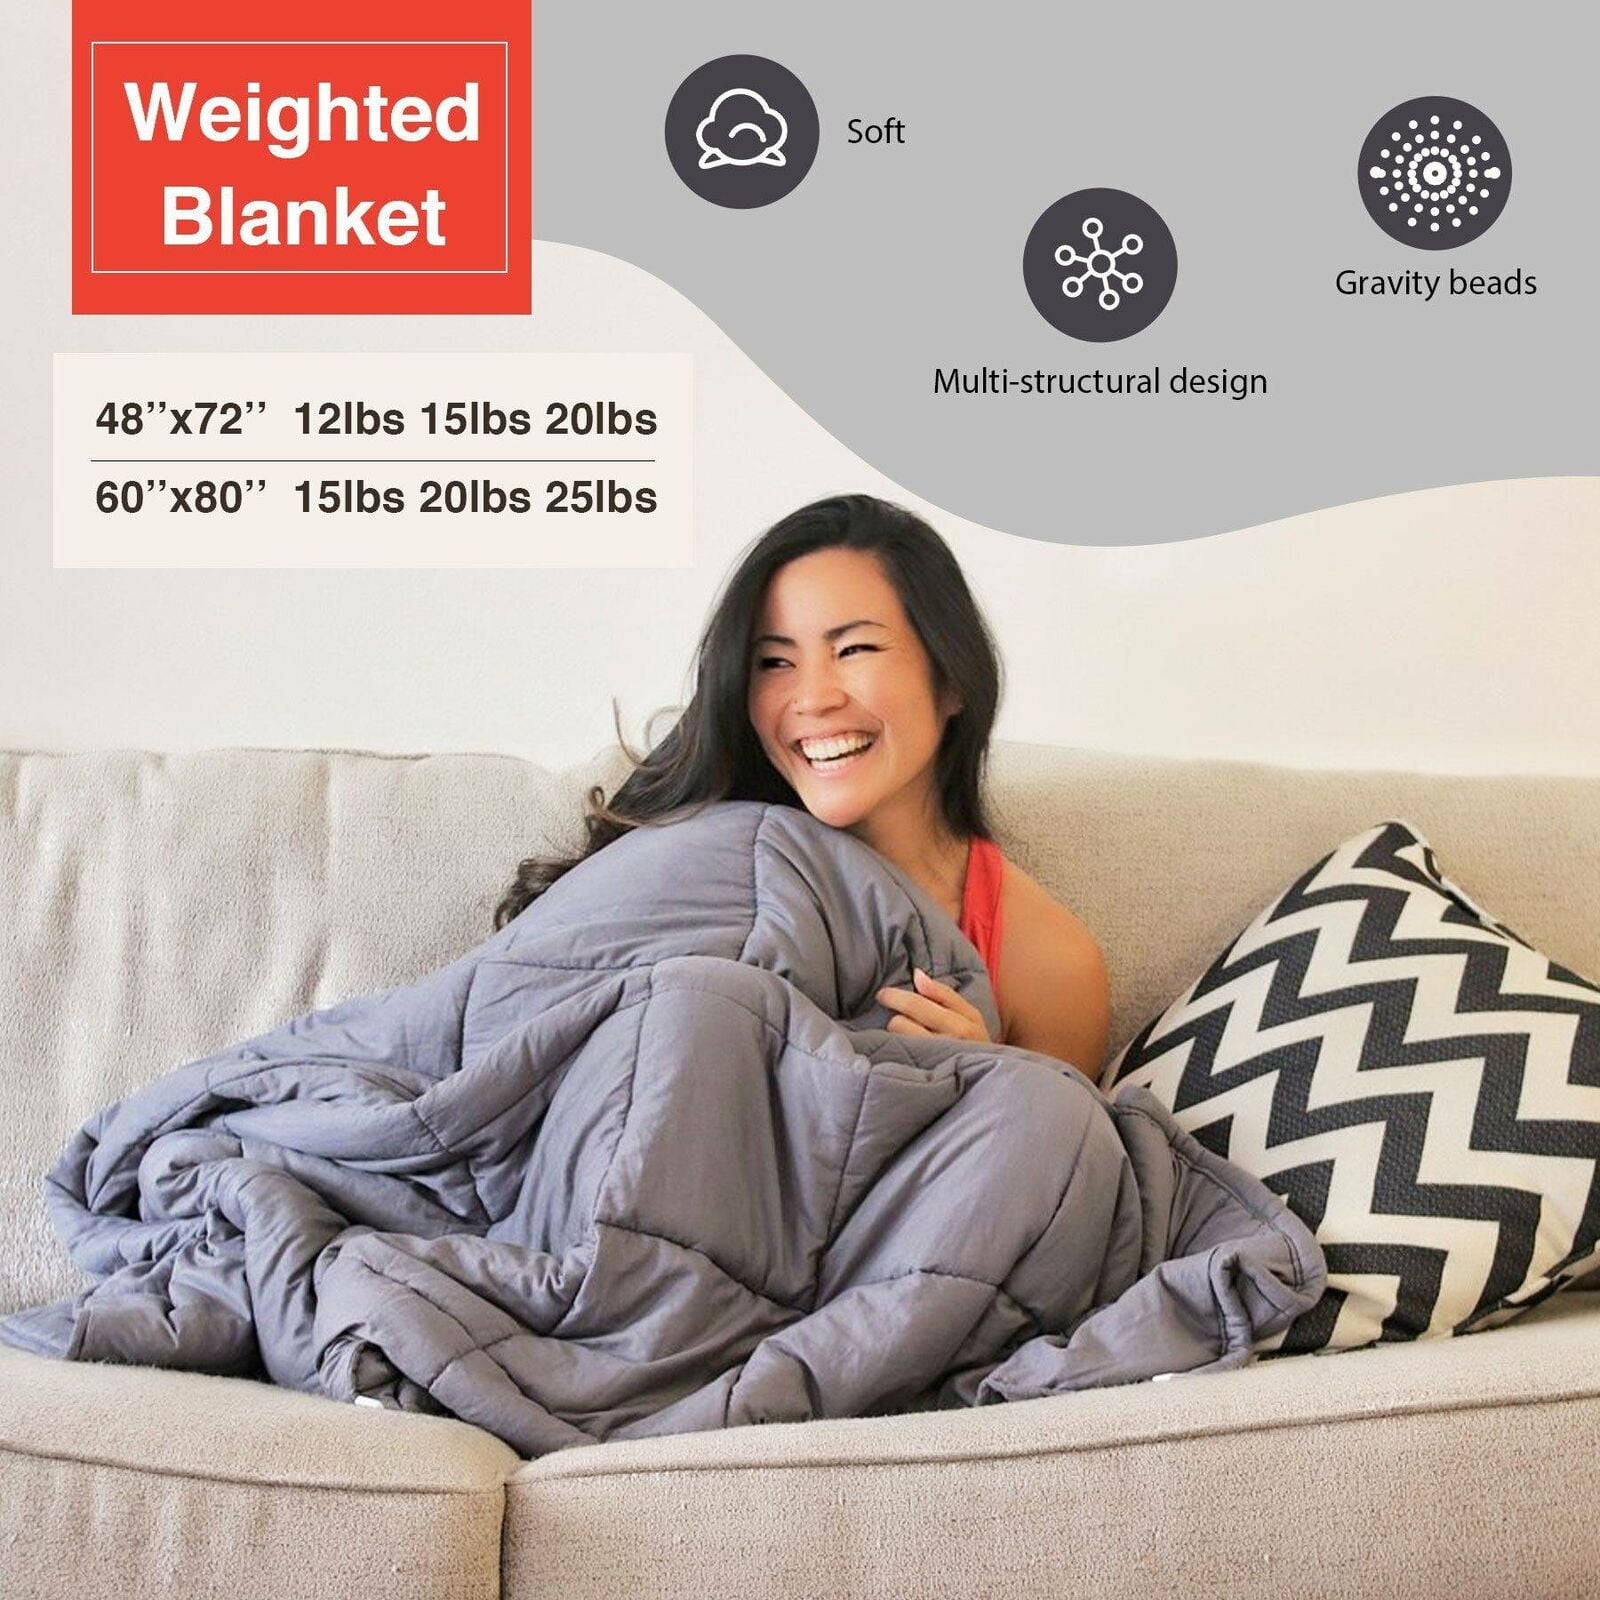 Weighted Blanket Twin Size Reduce Stress Promote Deep Sleep 48" x 72" 20lb